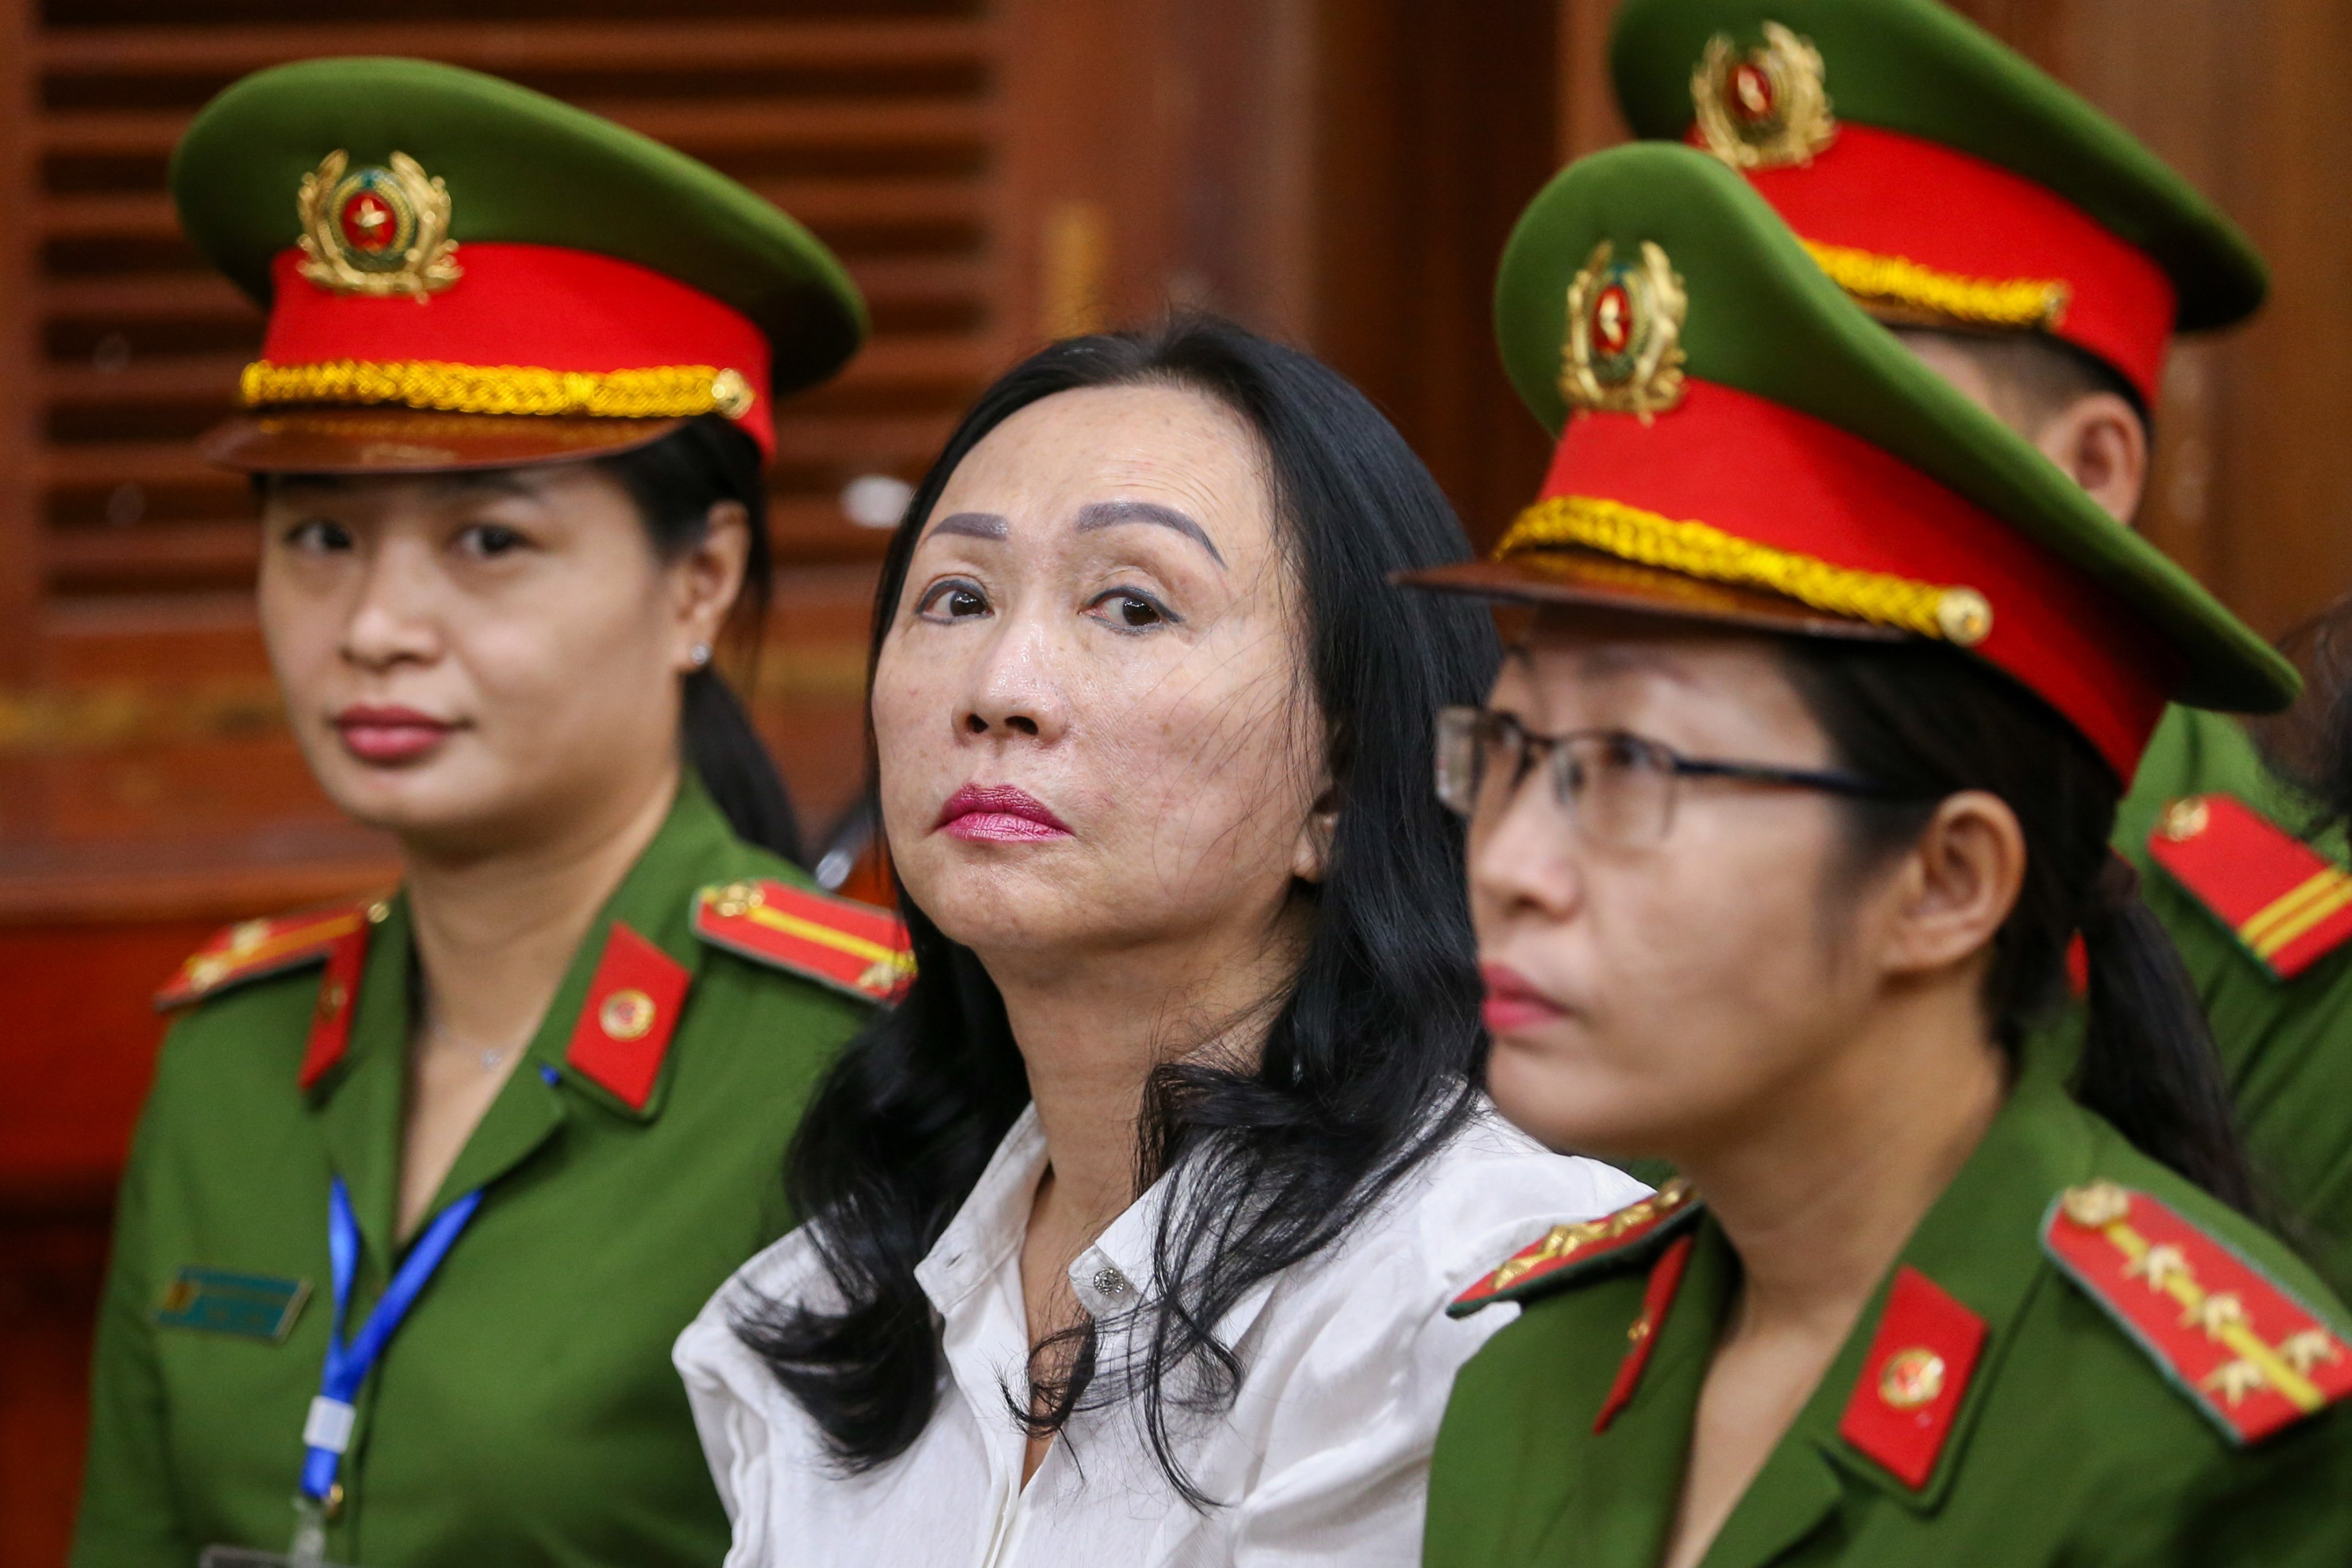 Truong My Lan (centre), chairwoman of Van Thinh Phat Holdings, sits during her trial at the Ho Chi Minh City People’s Court in Ho Chi Minh City, Vietnam, on Thursday. Photo: EPA-EFE